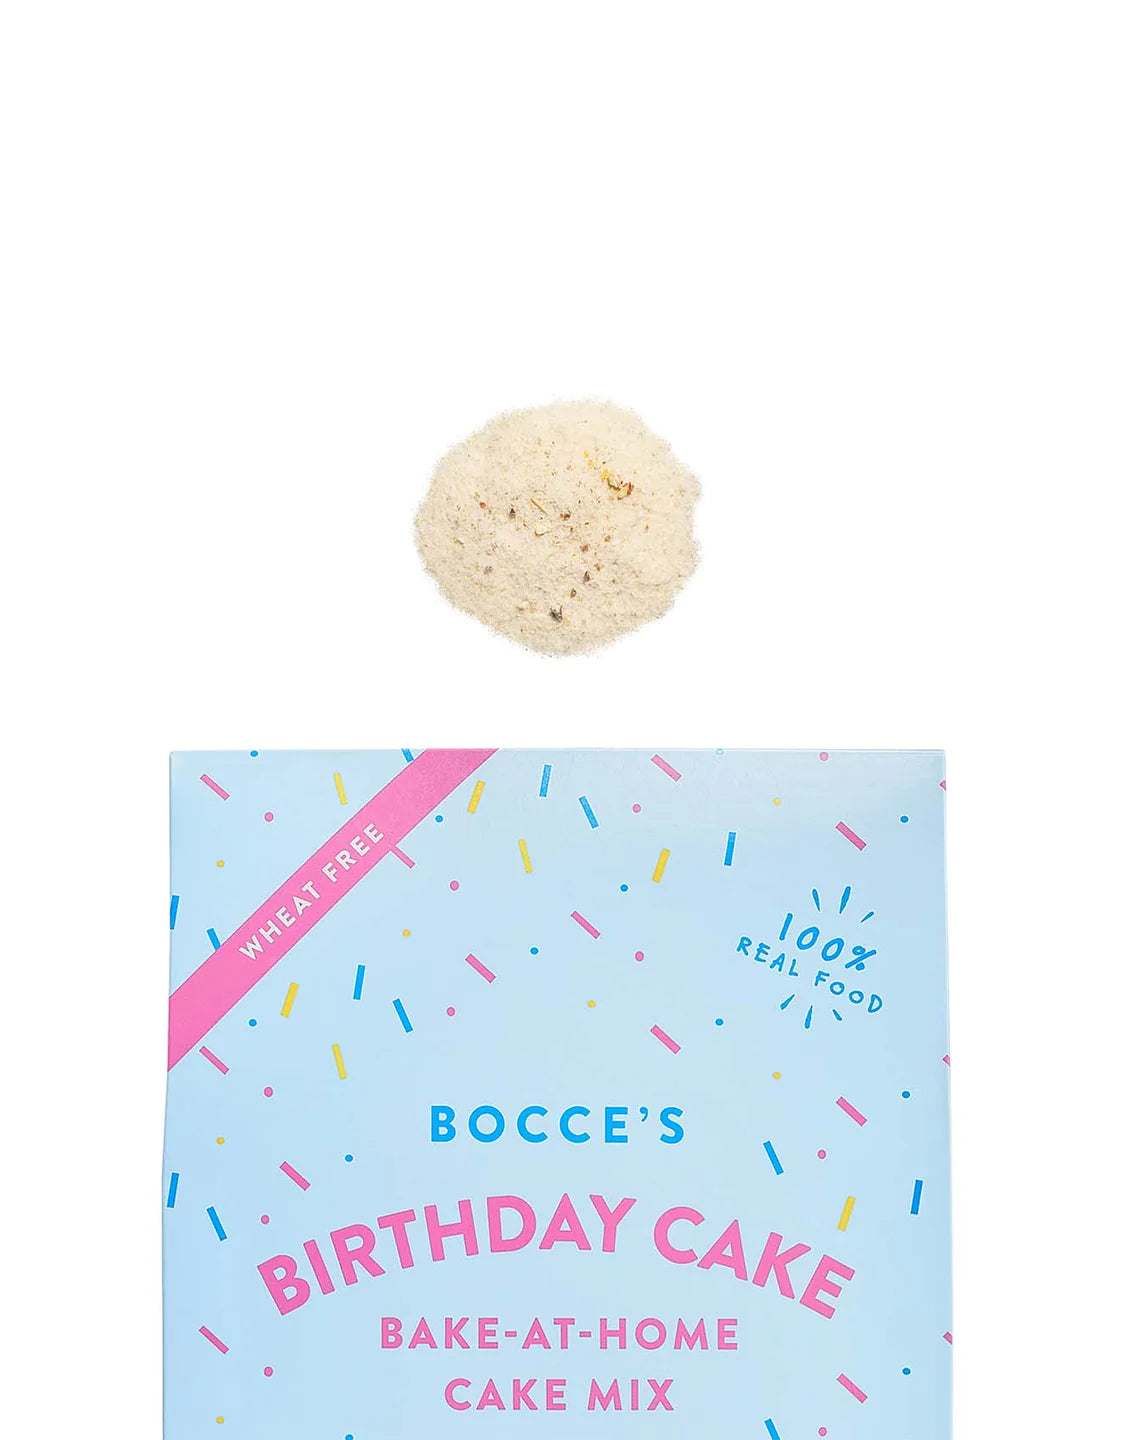 Bocce's Bakery - Birthday Cake Mix for Dogs